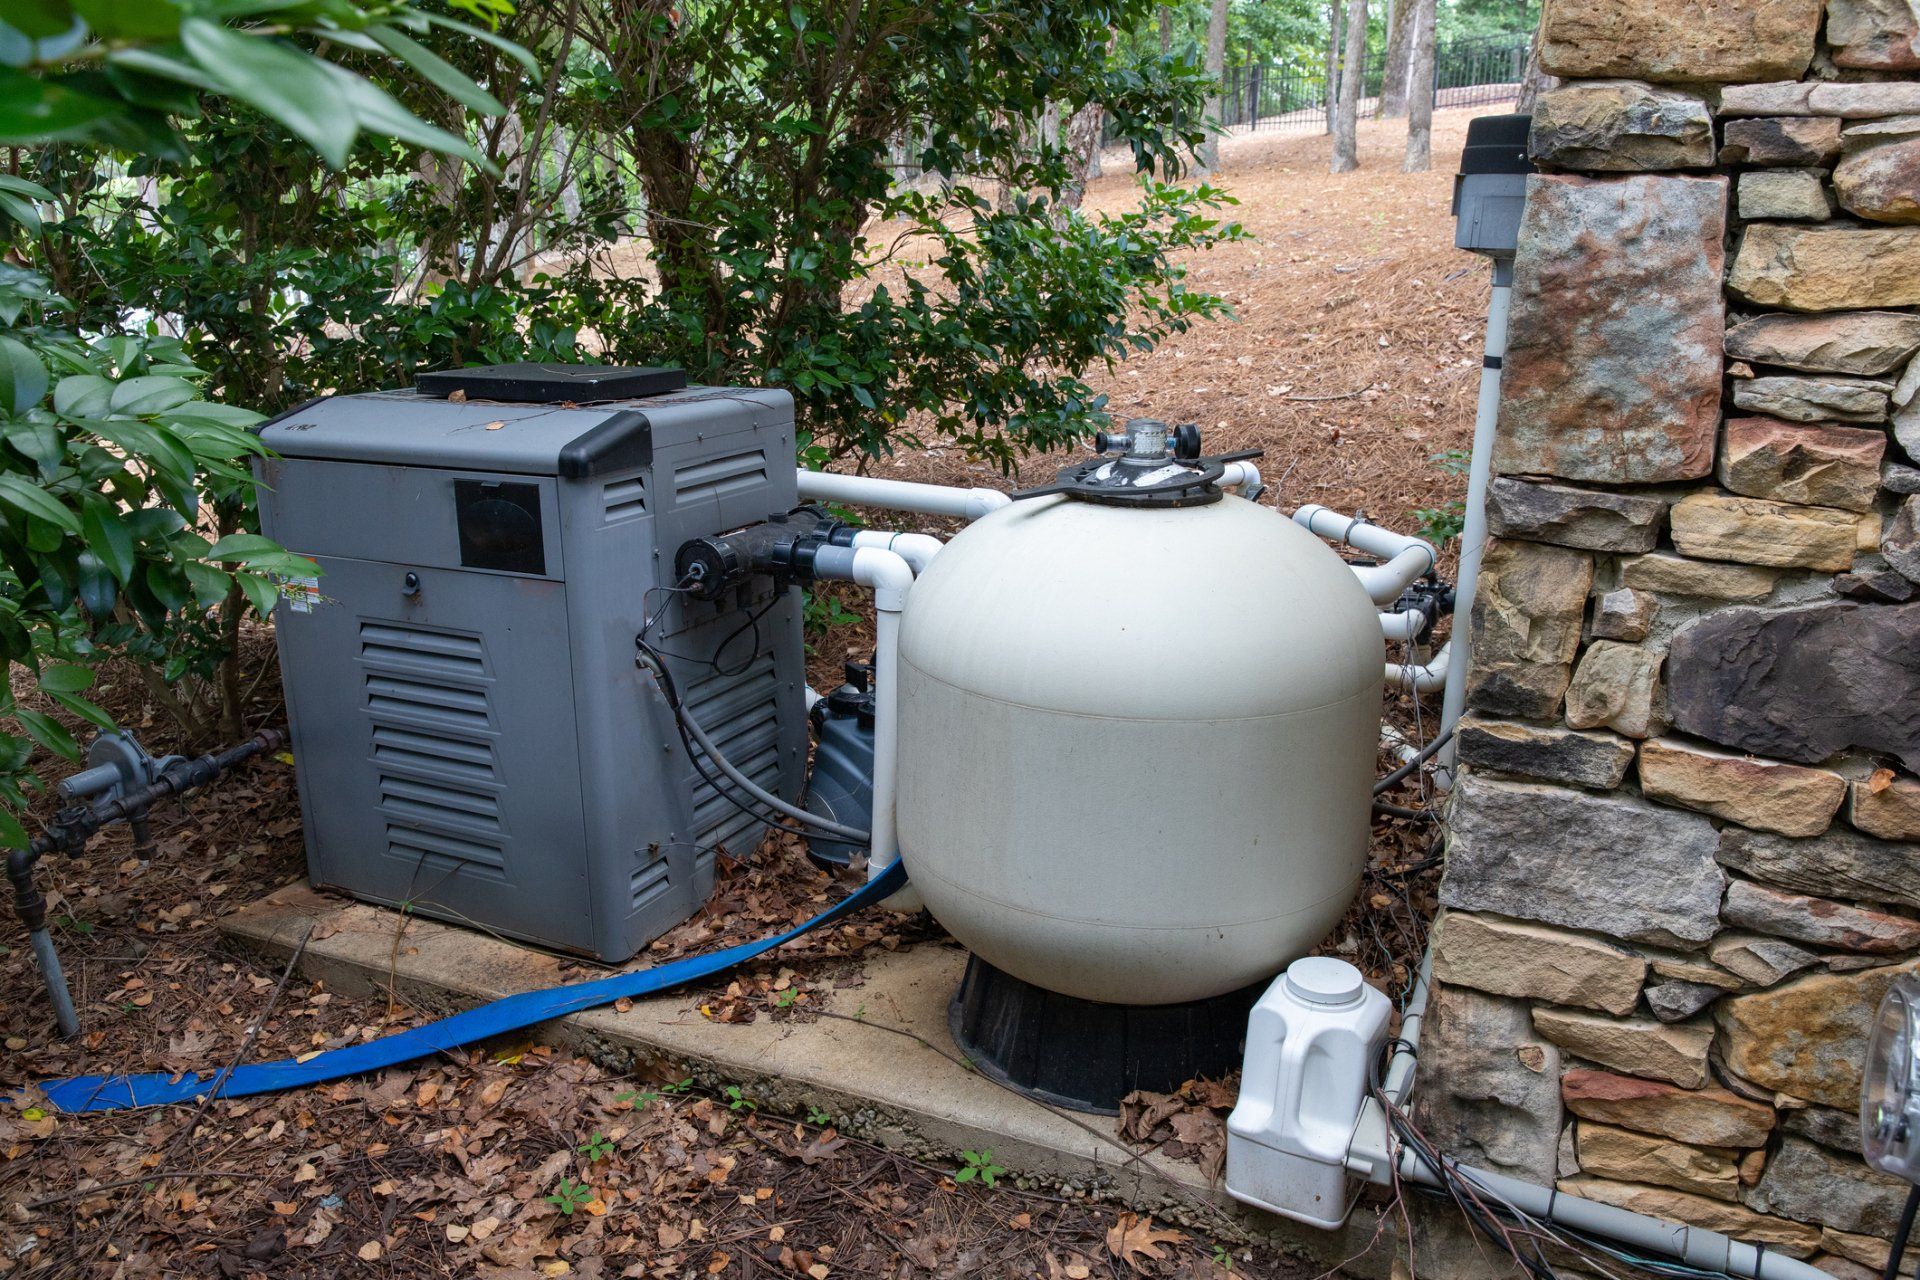 Pool Pump And Filtering Equipment For Maintaining A Clean Swimming Pool - Cleveland, TN - Calfee Clyde & Sons Well Drilling Inc.